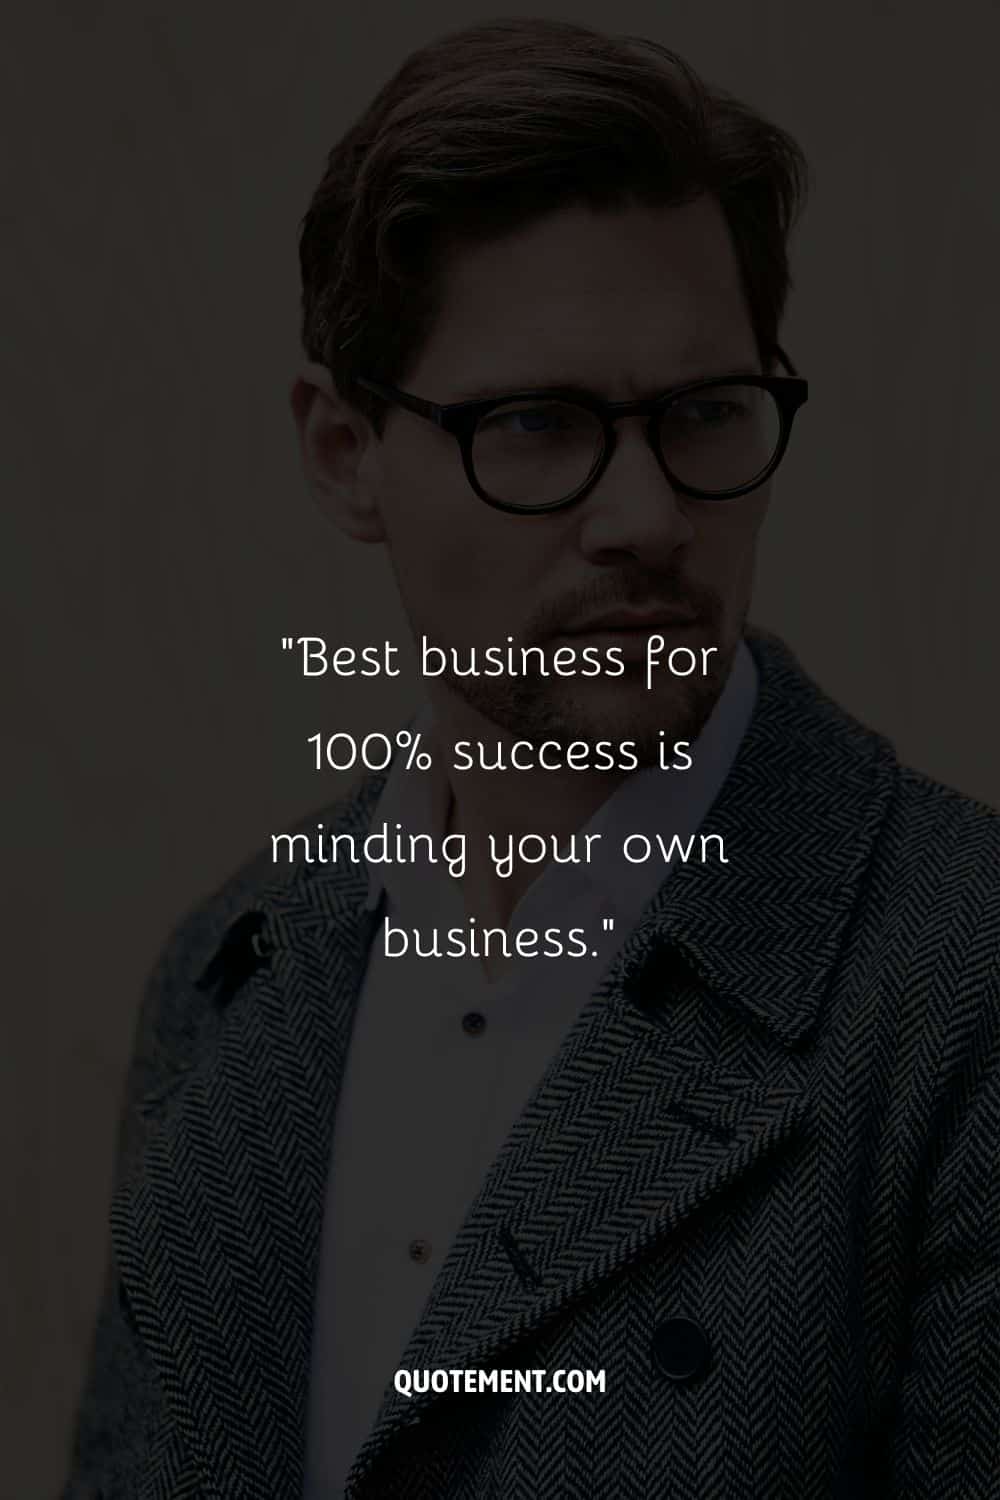 “Best business for 100% success is minding your own business.”